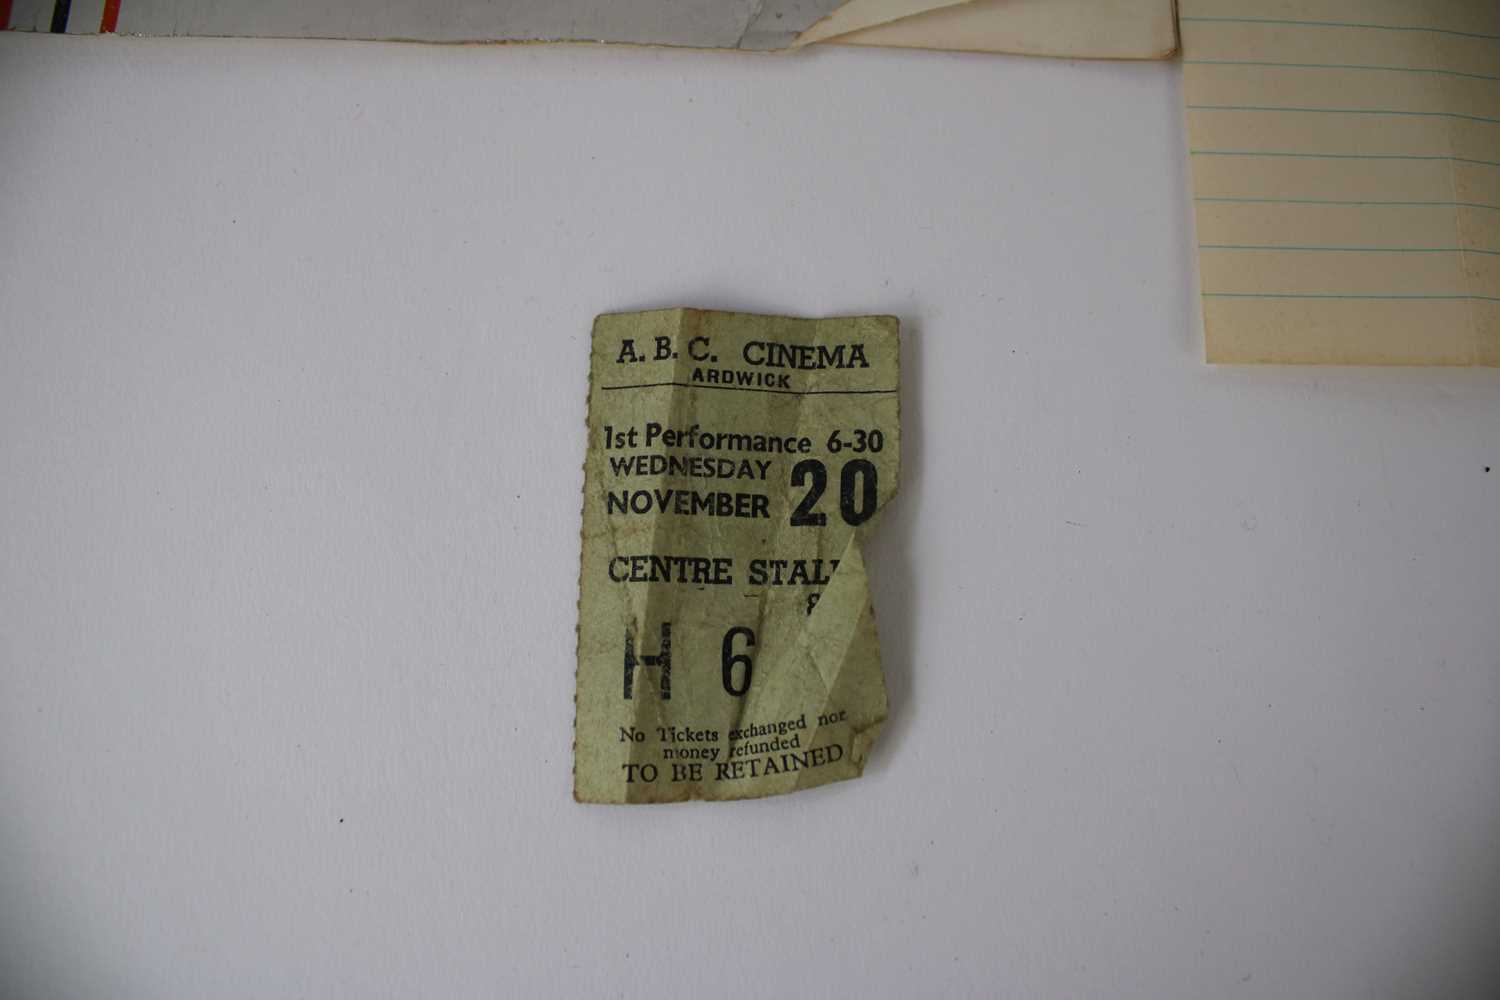 The Beatles Interest Ticket Stub for a 1963 Performance in Ardwick, Manchester - Image 2 of 5